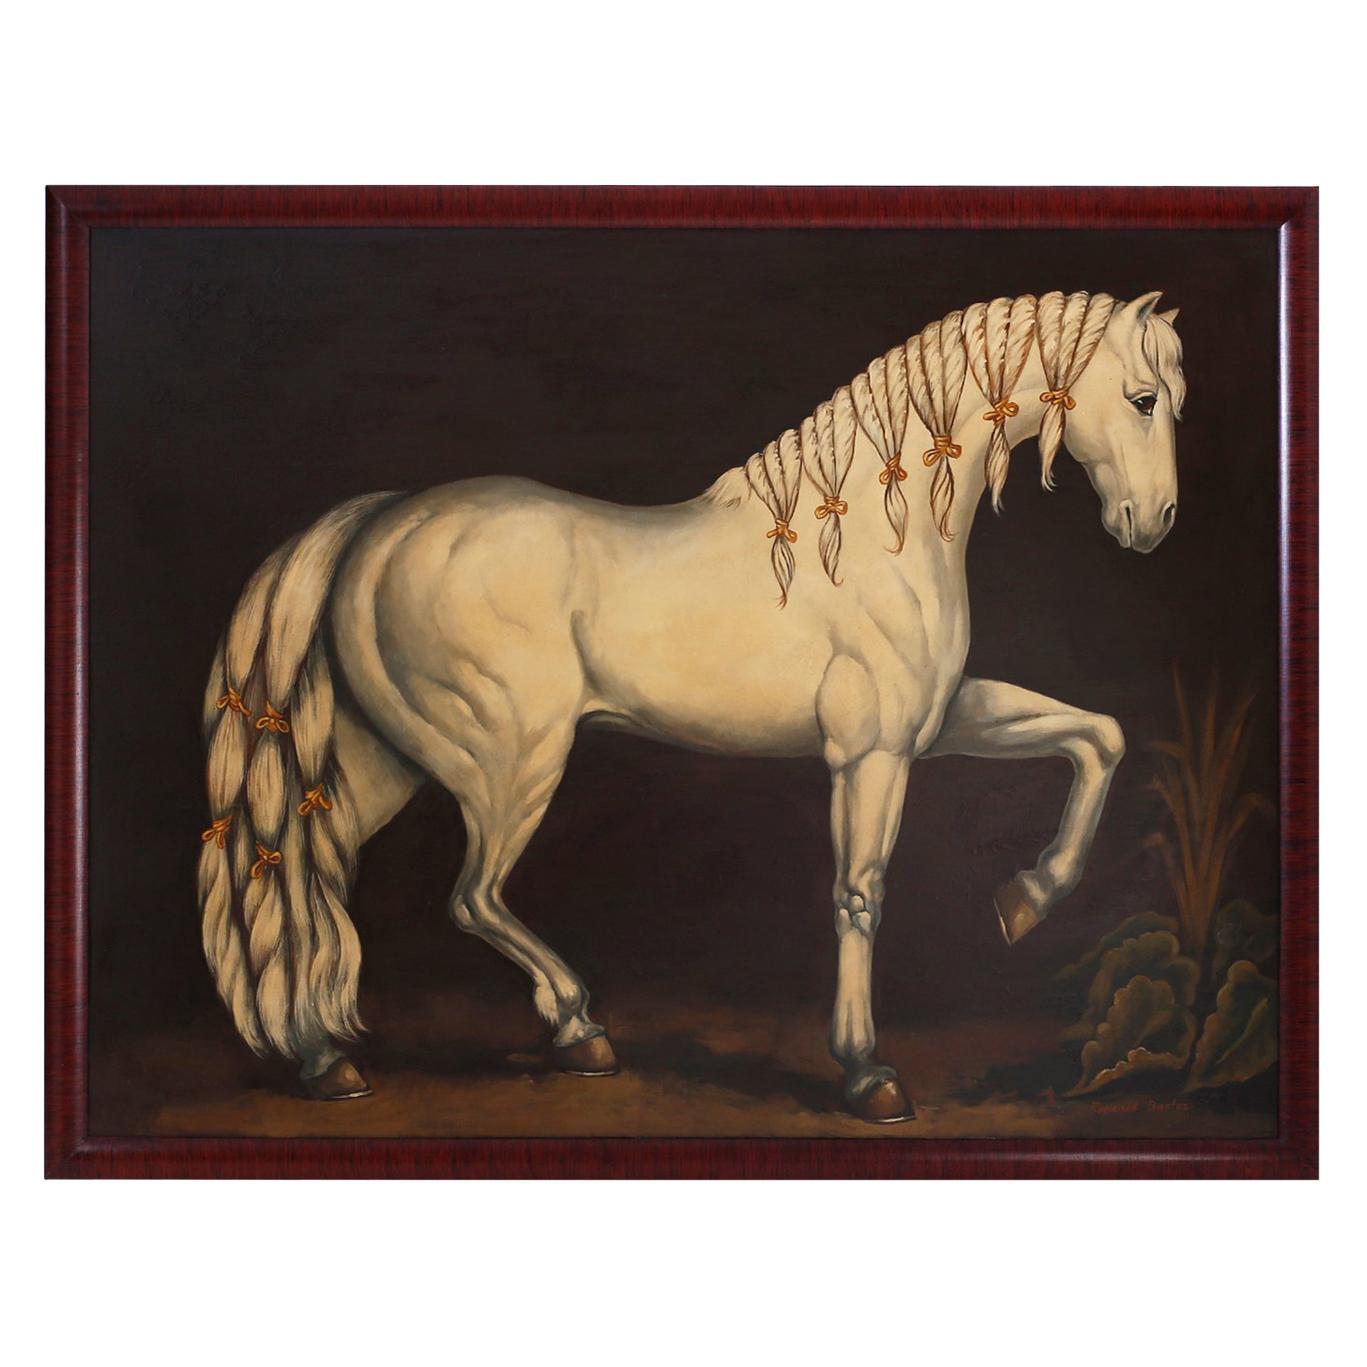 Large Oil Painting on Canvas of a Show Horse by Reginald Baxter